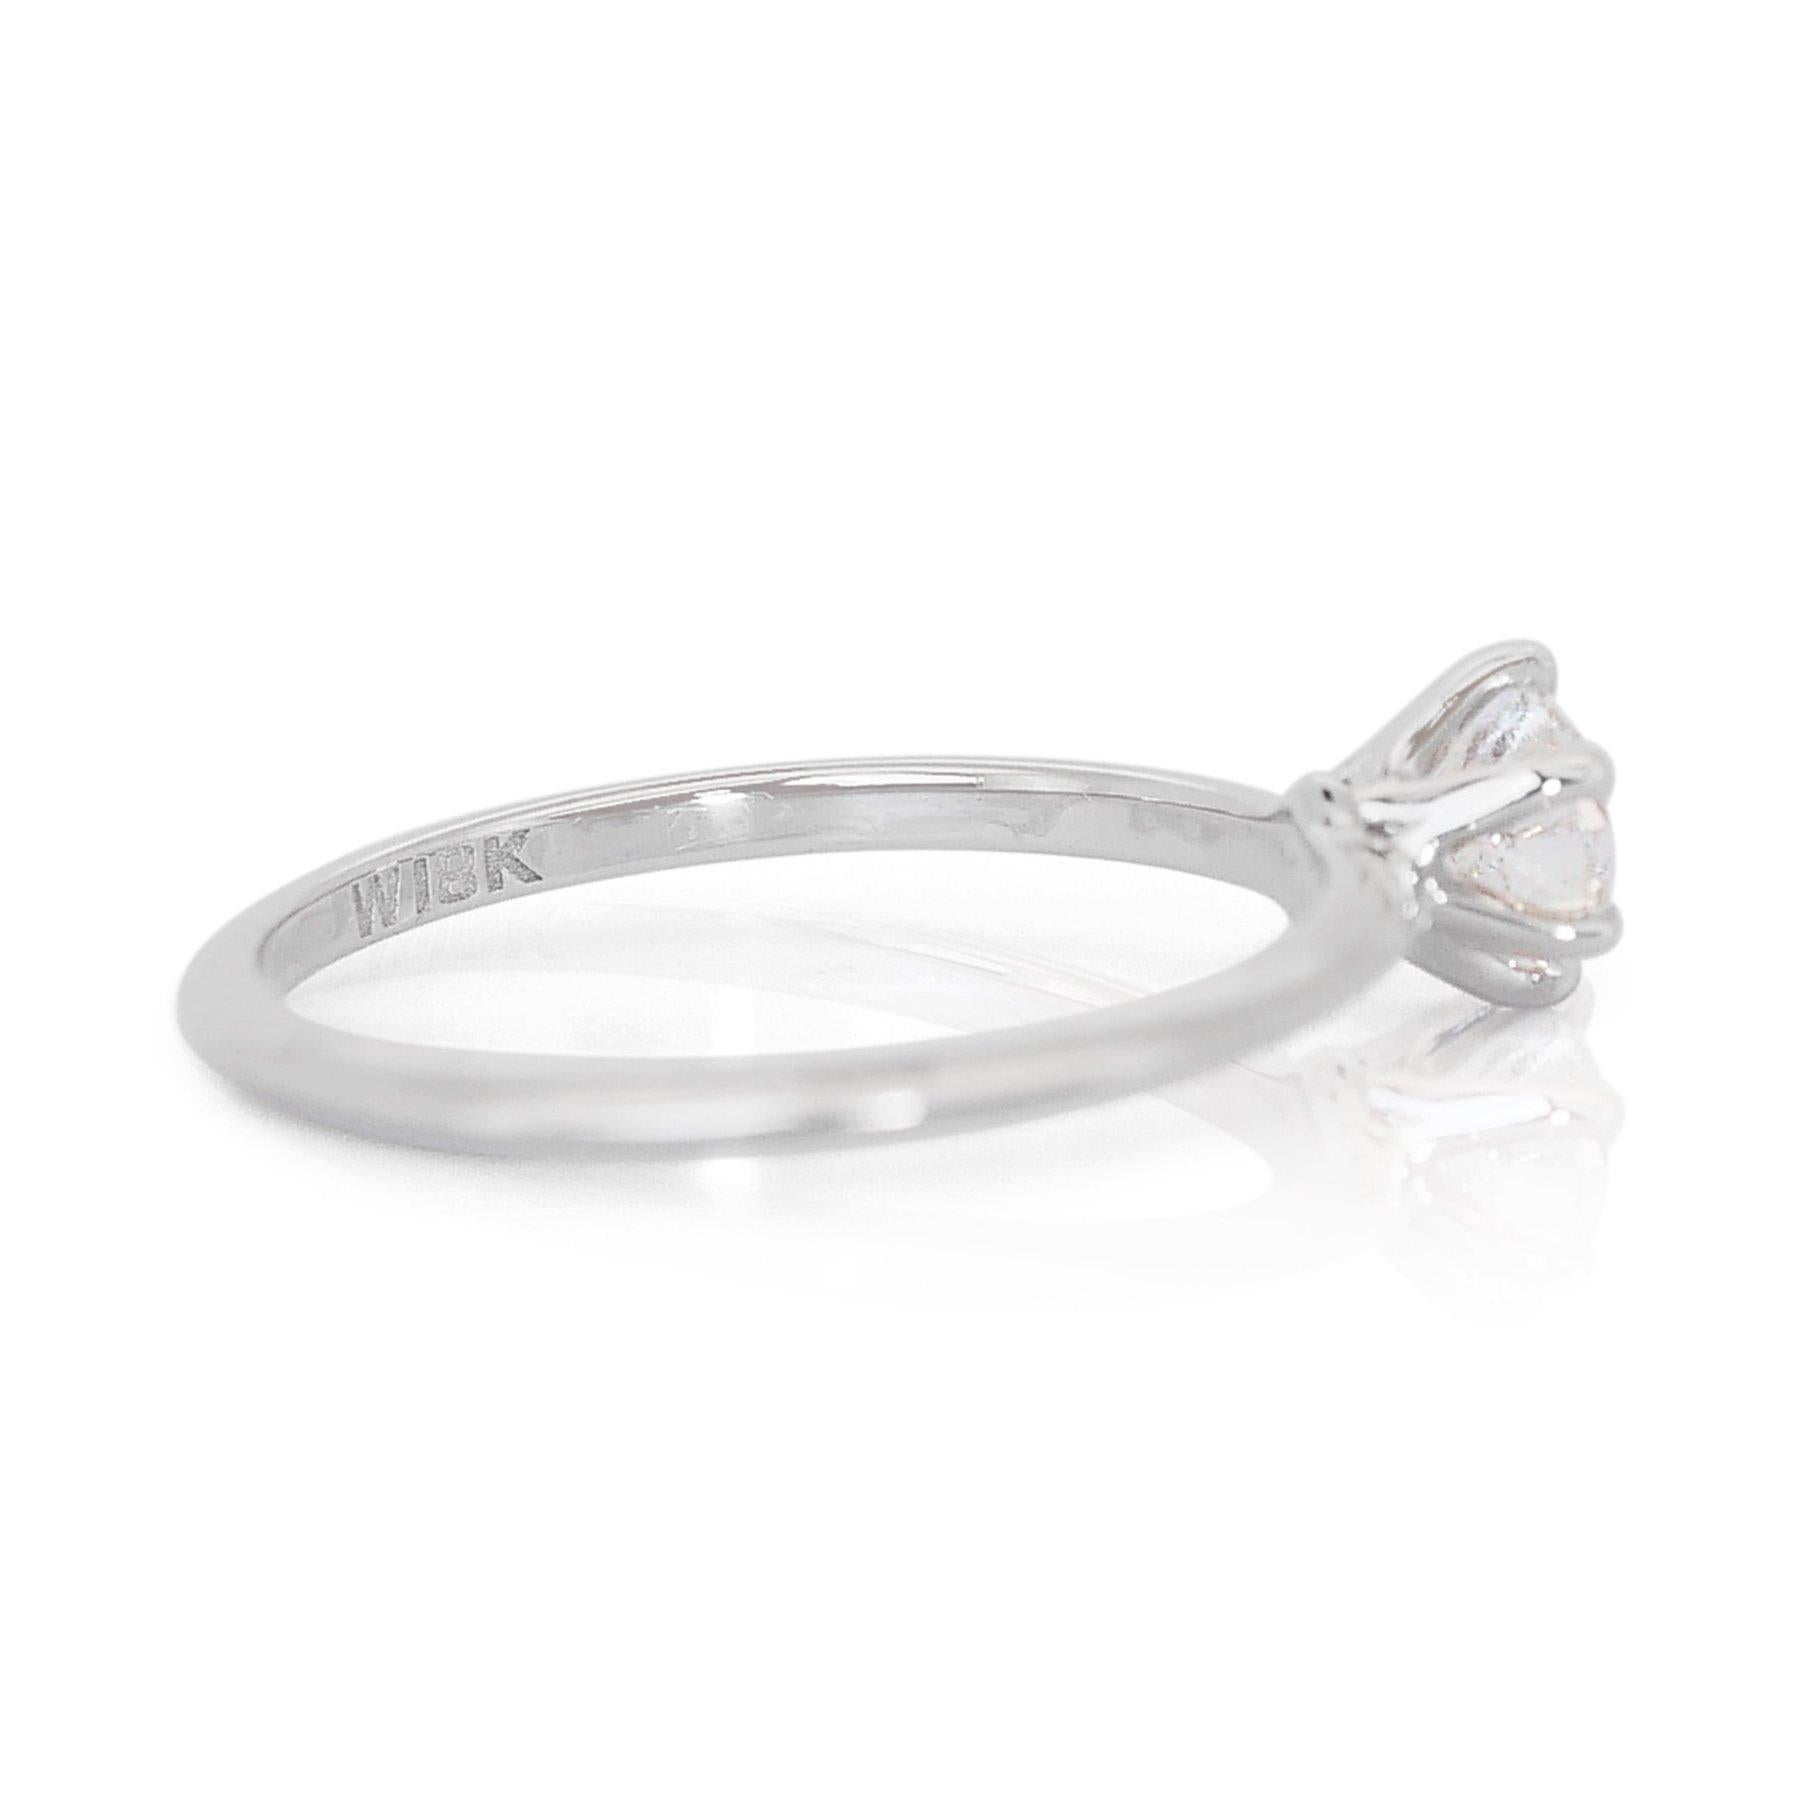 Exquisite 0.70ct Round Diamond Solitaire Ring in 18k White Gold - GIA Certified For Sale 1